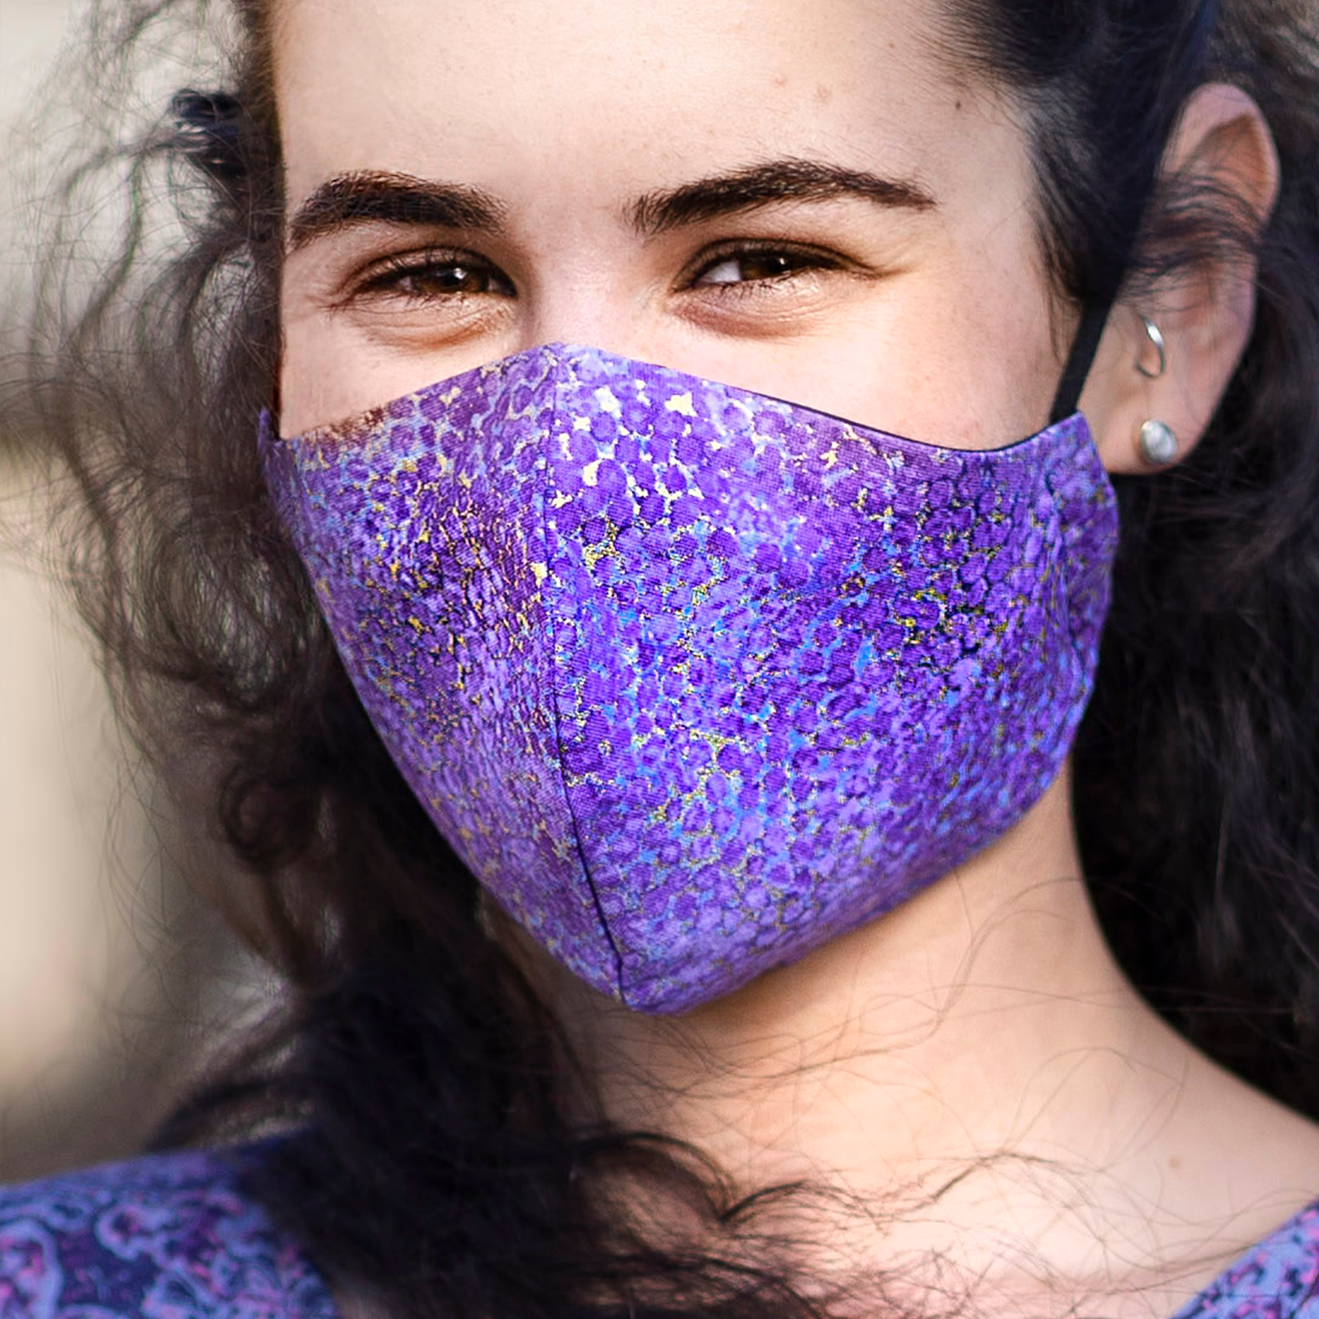 Triple layered face mask made in Melbourne Australia from cotton and poplin featuring a unique shiny glimmering lavender print